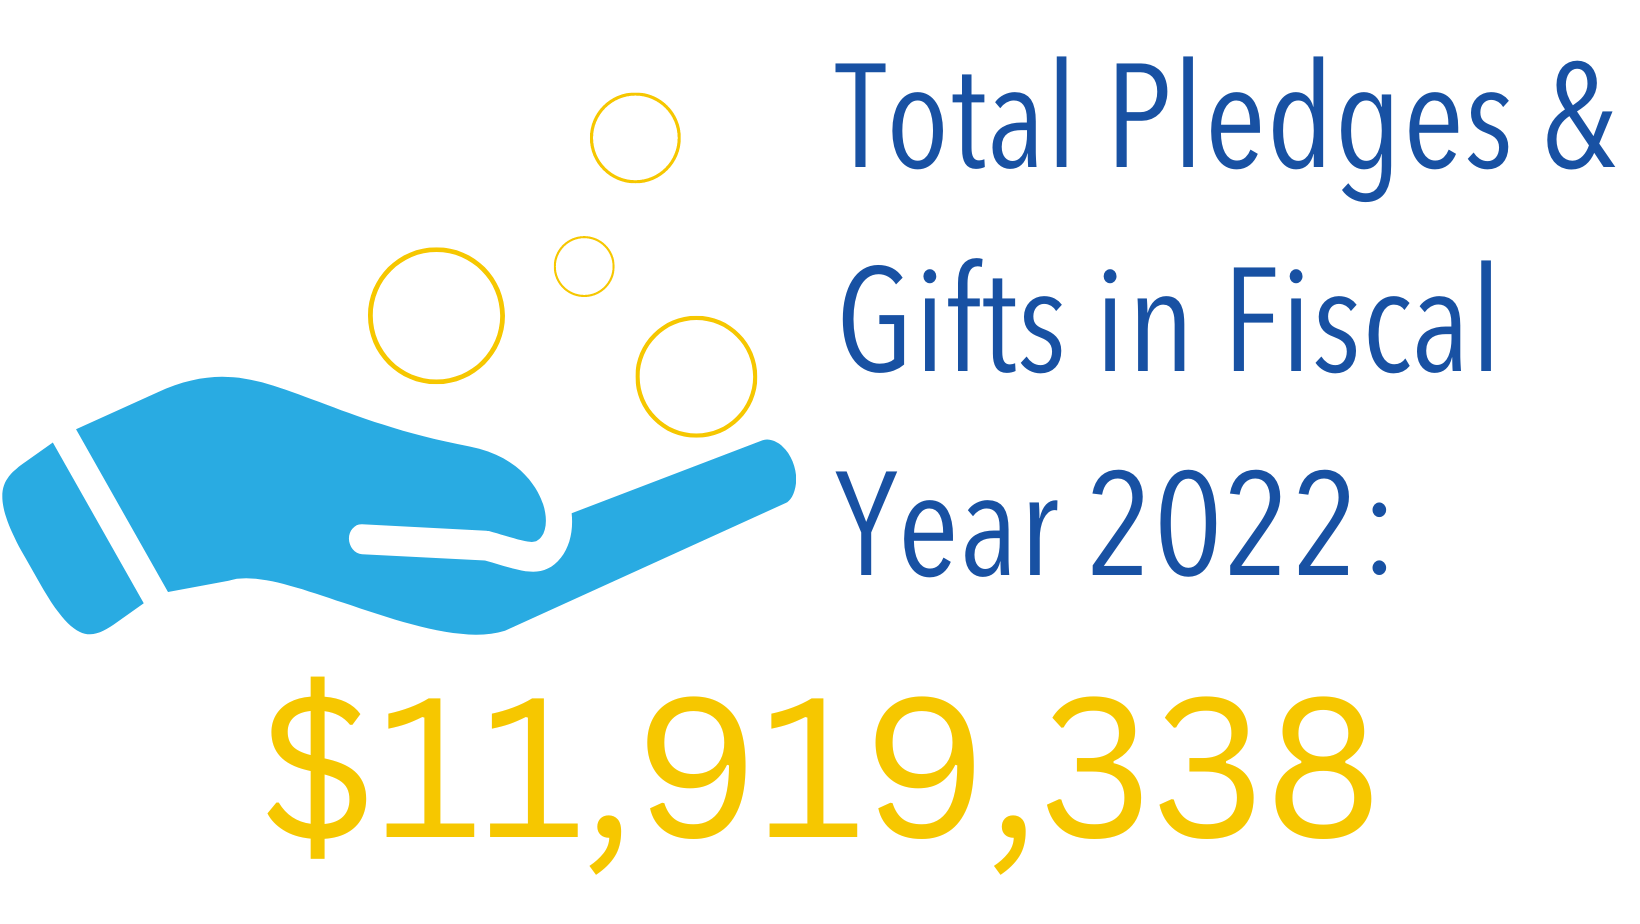 Total pledges and gifts